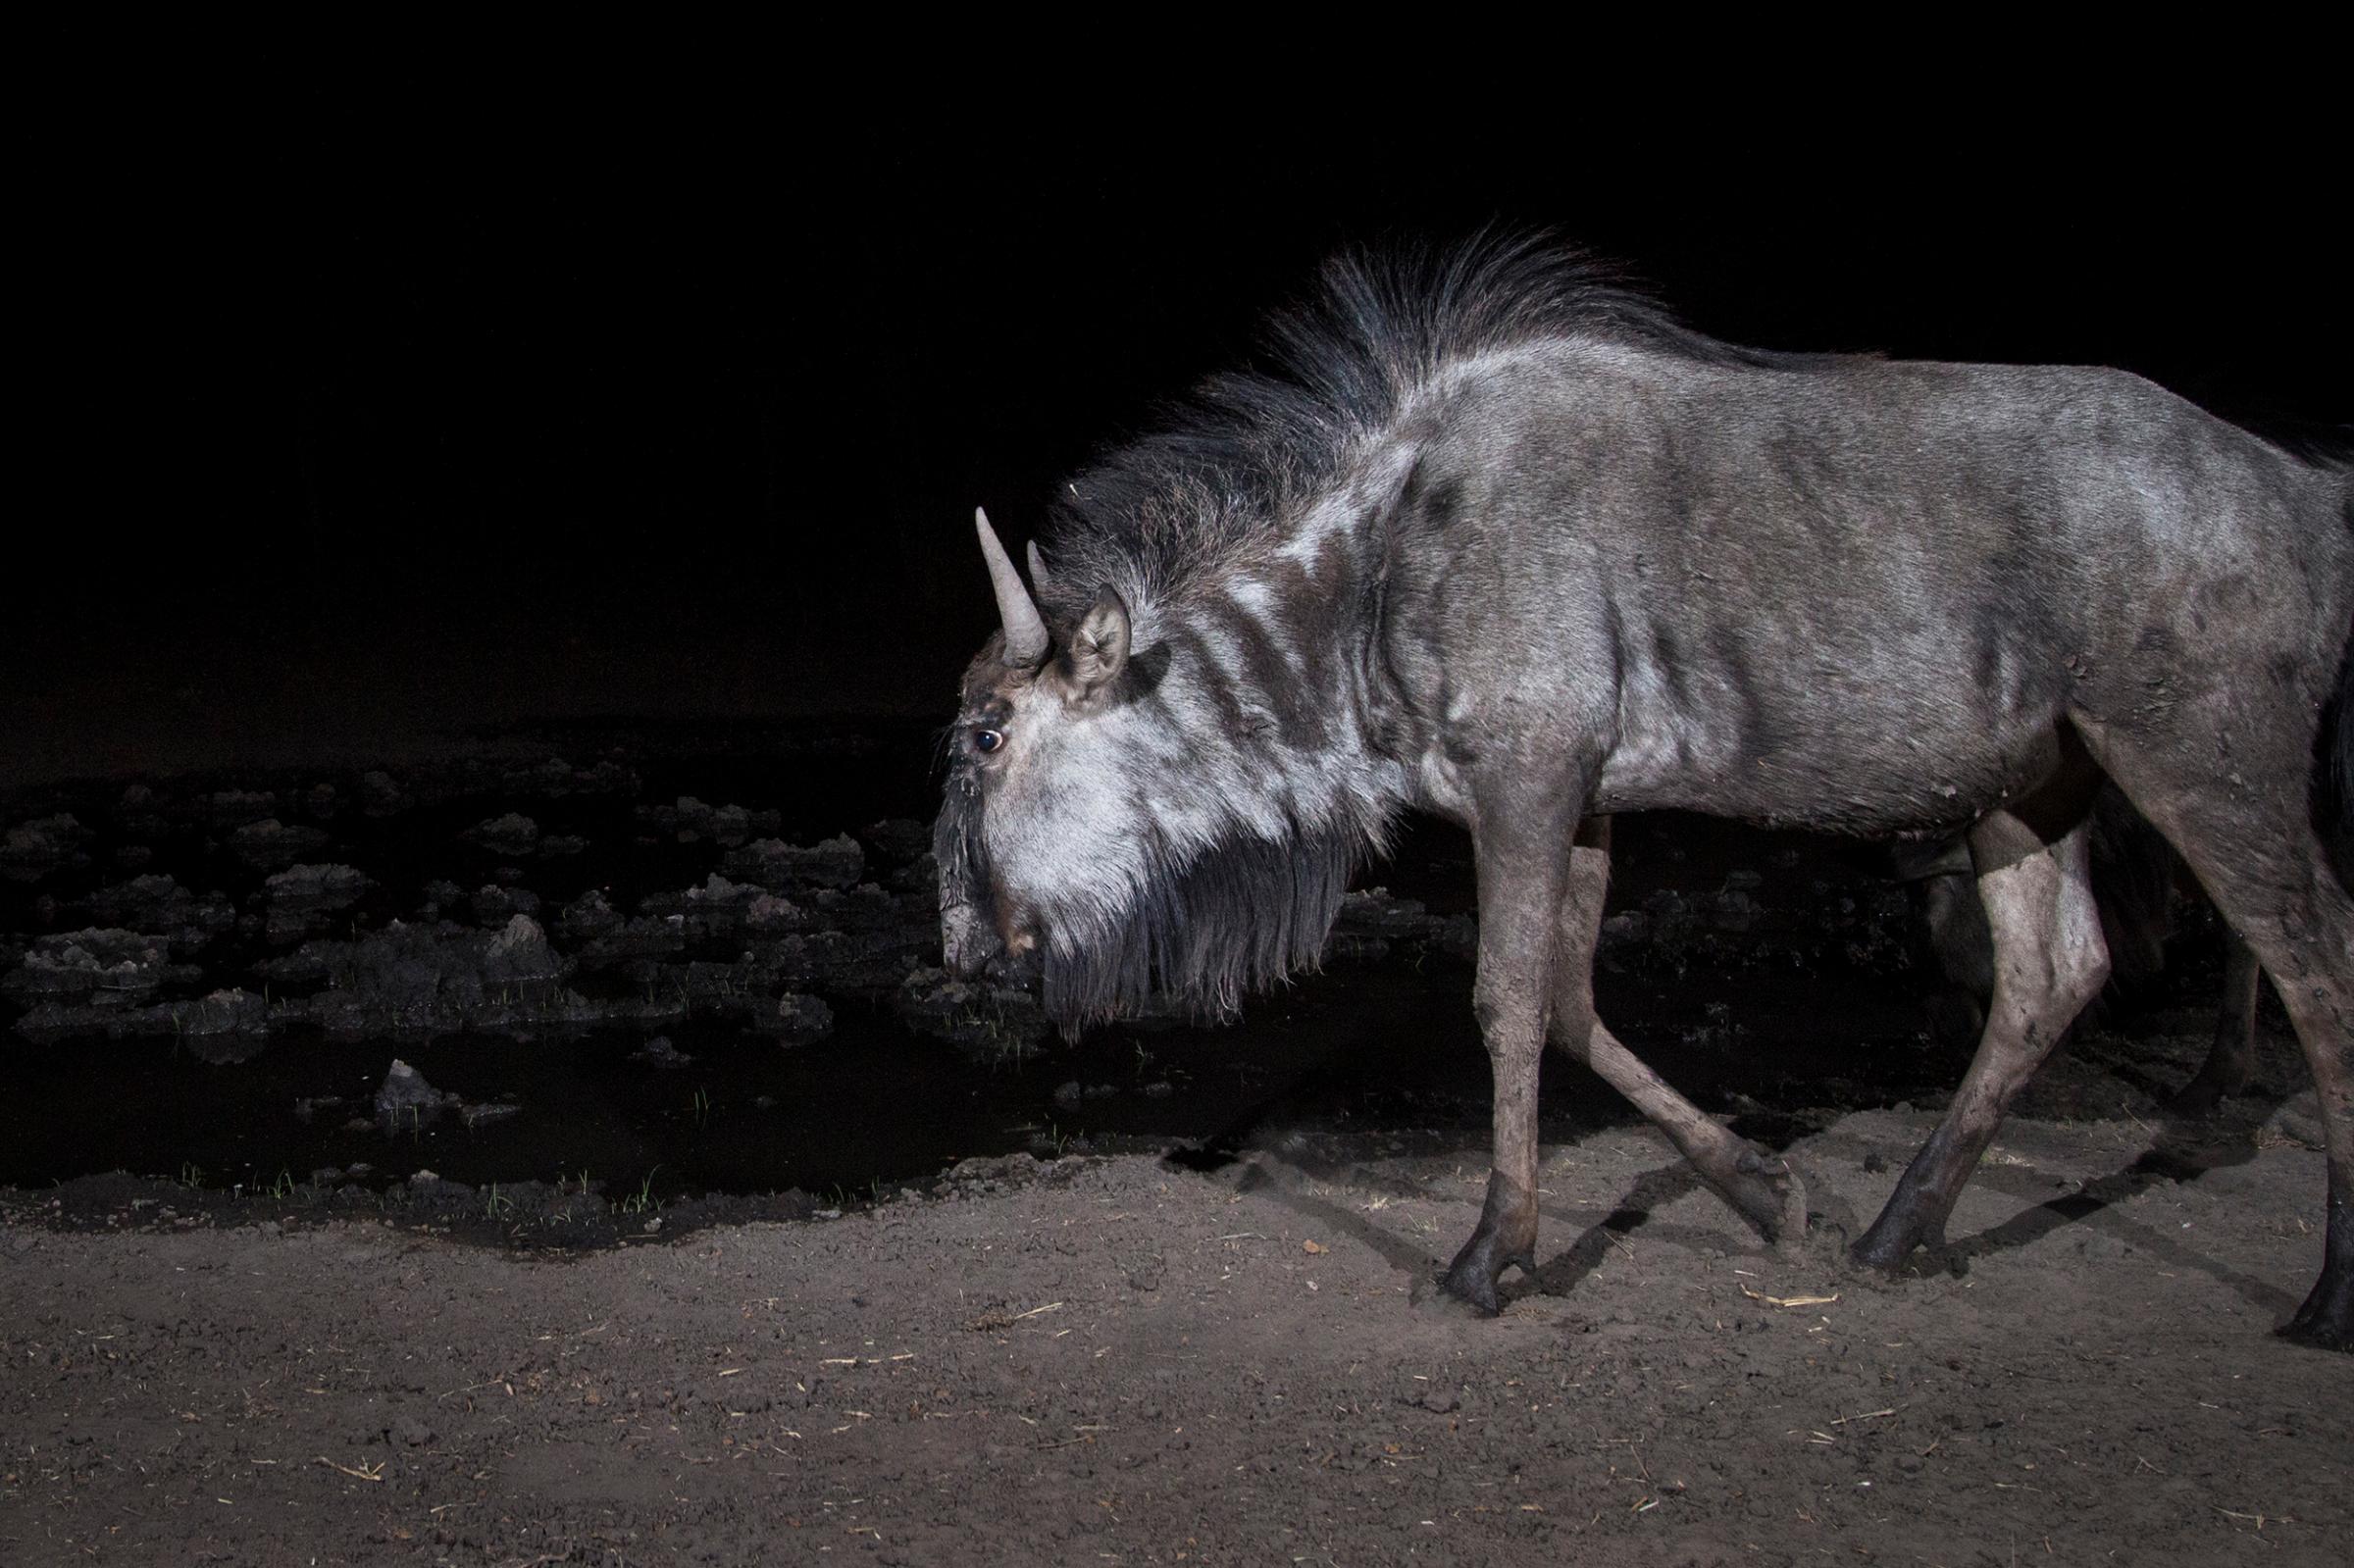 A camera trap image of a wildebeest using Camtraptions PIR motion sensor.